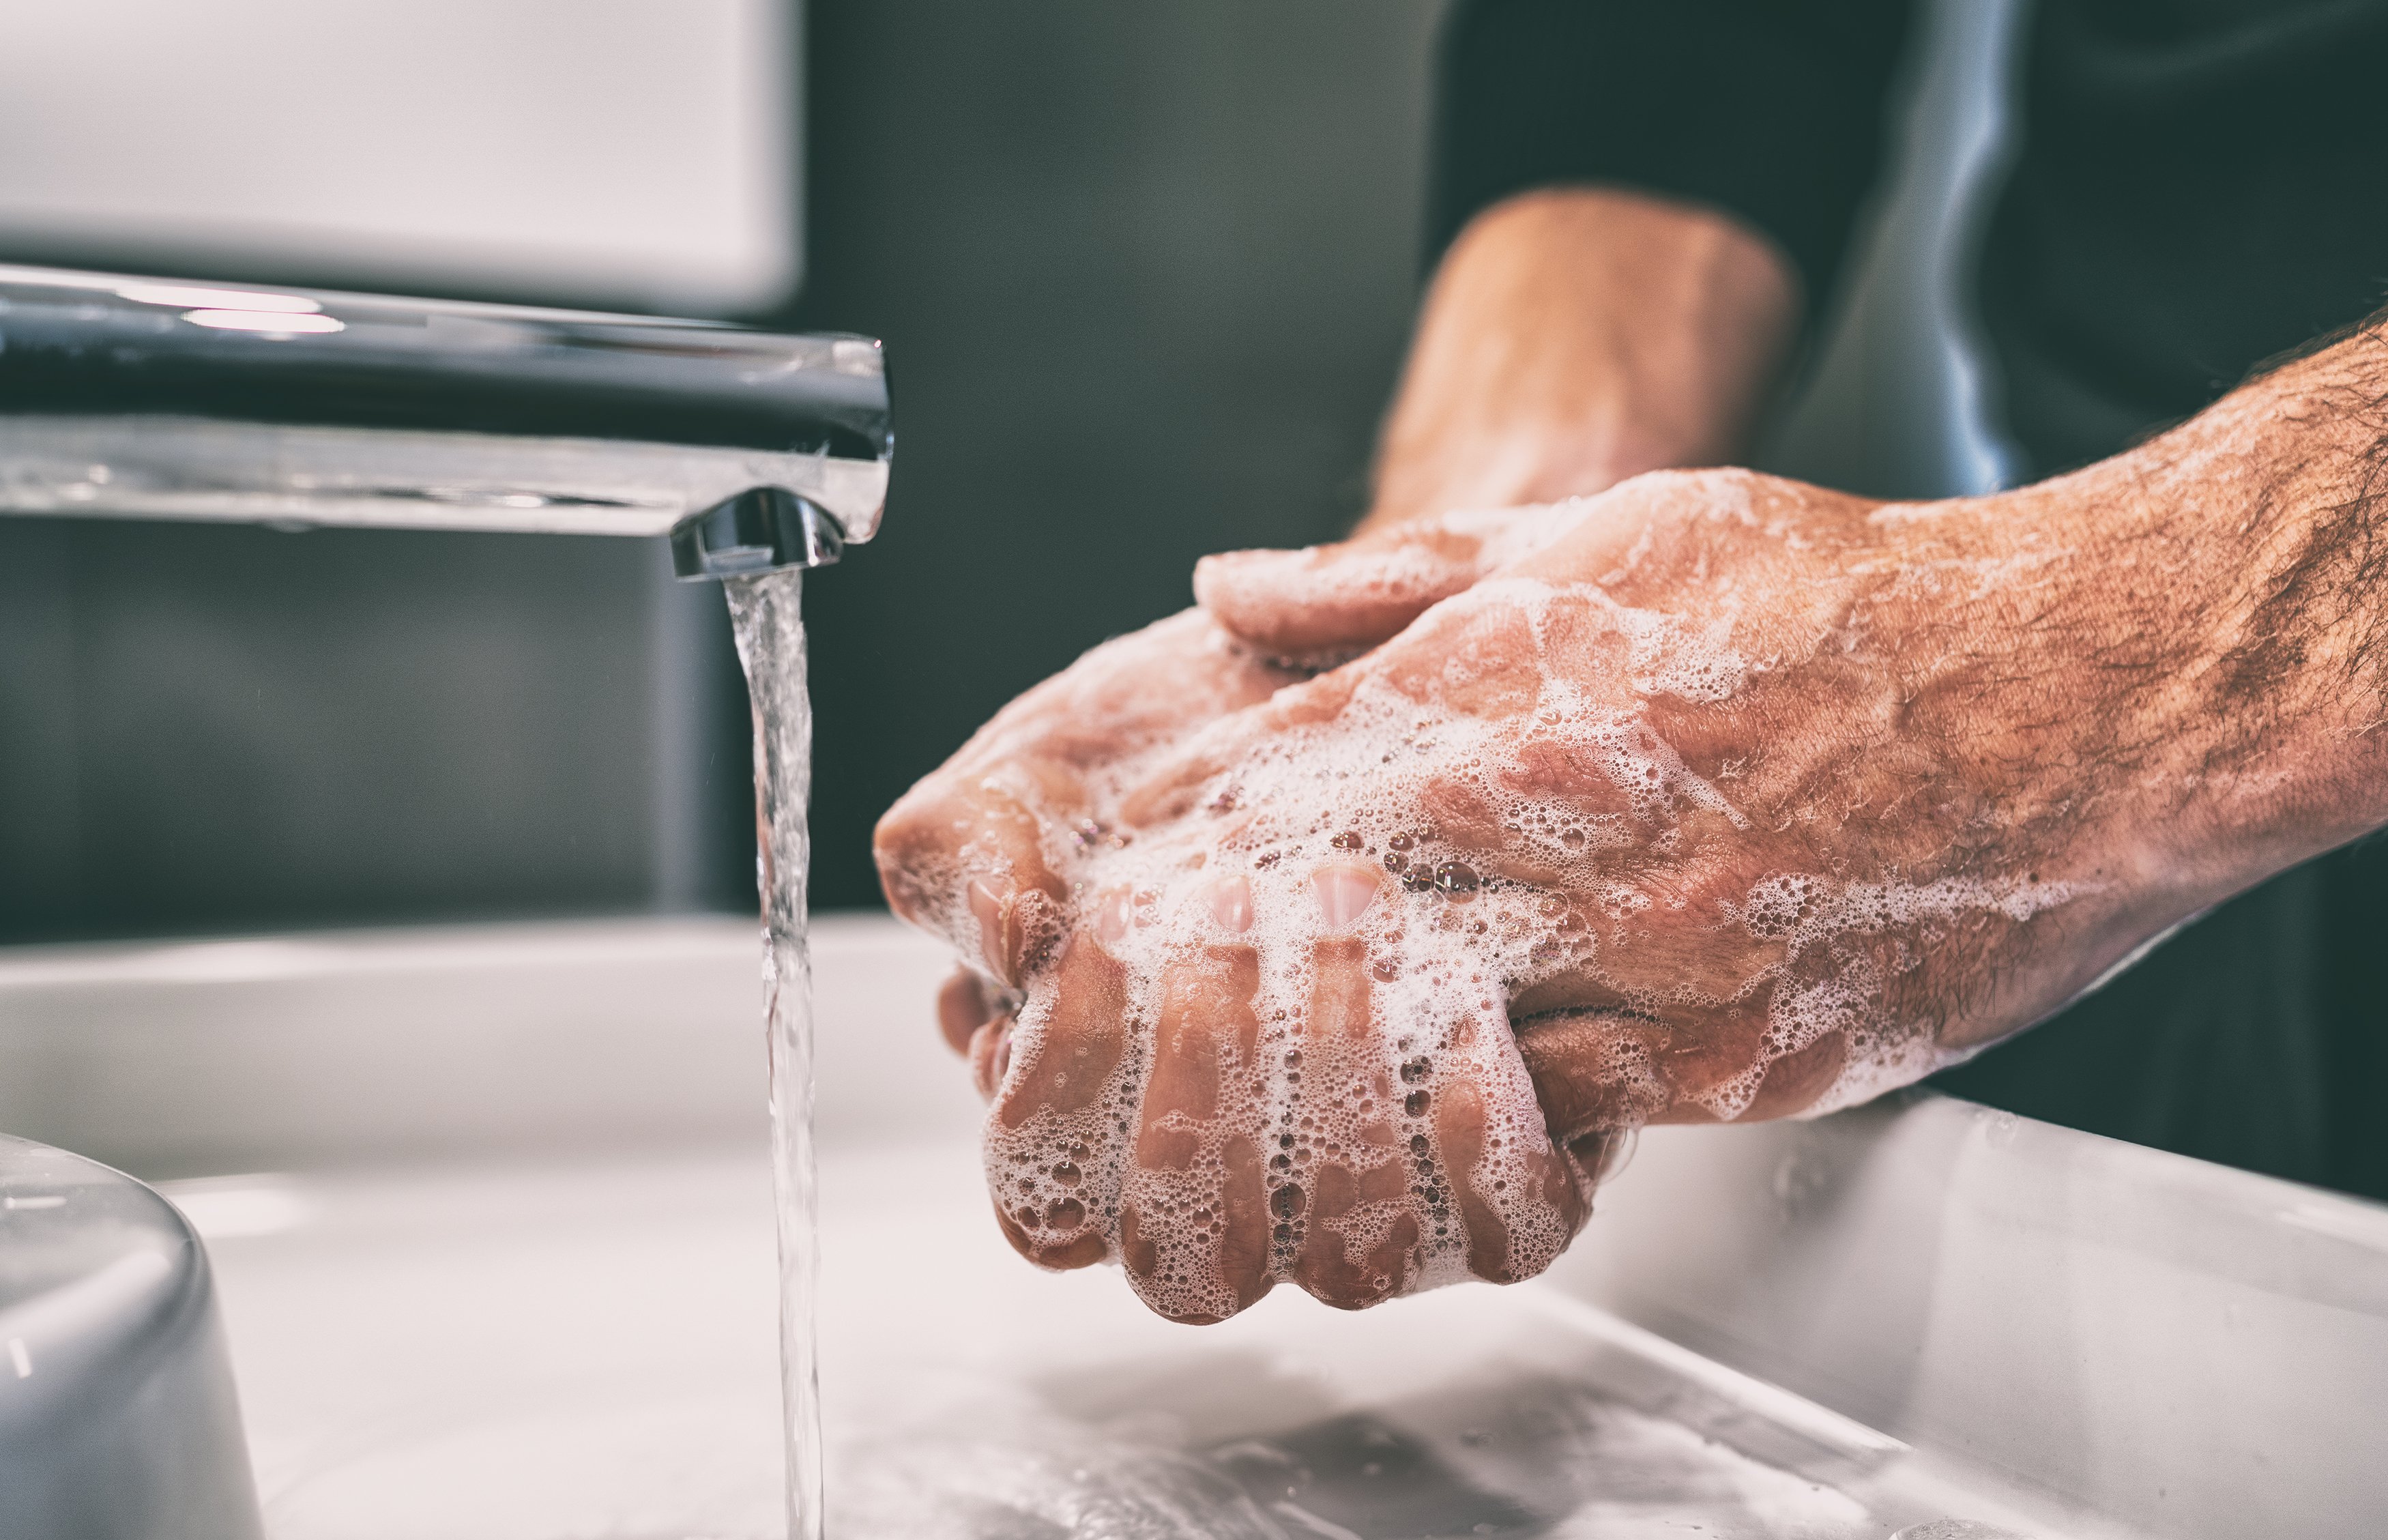 An older adult carefully washing their hands